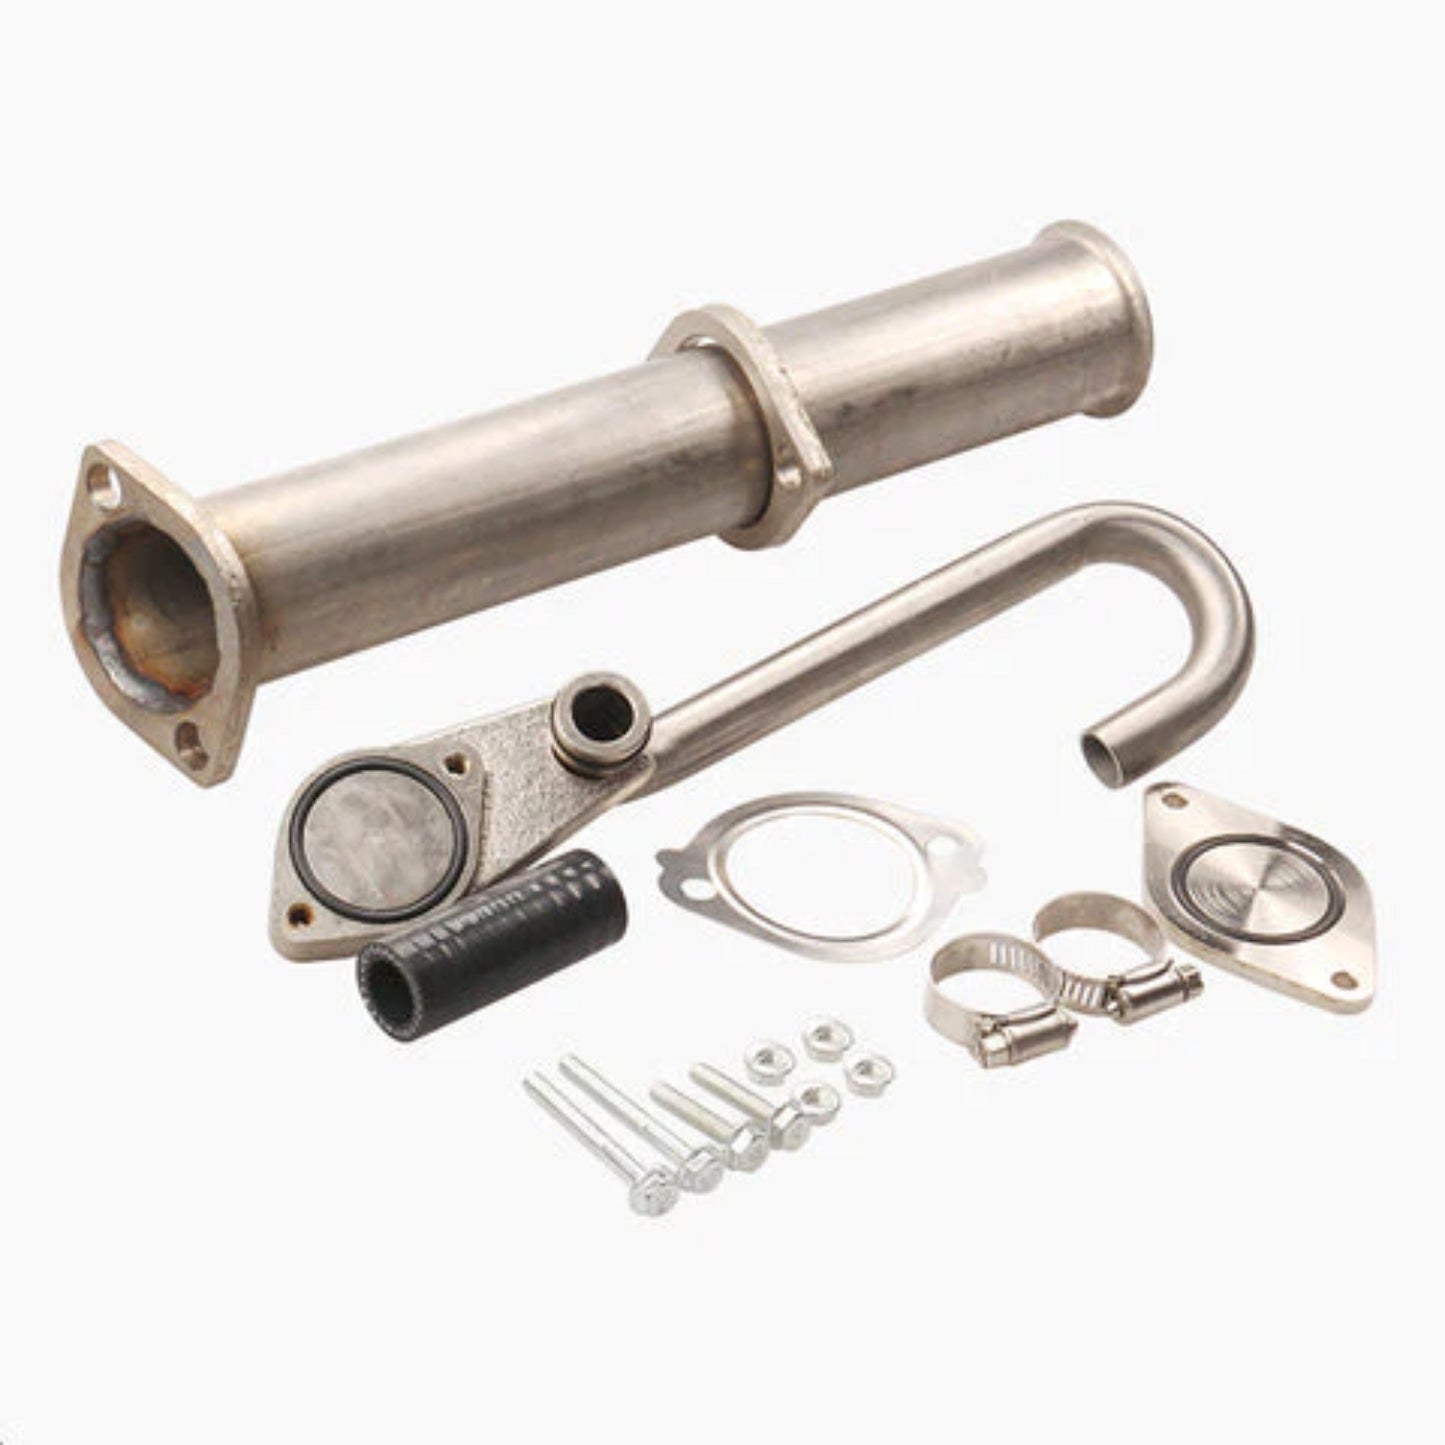 6.0 Power Stroke Diesel Complete EGR Bypass and Delete Kit for 2003-2010 6.0L Ford Powerstroke F250 F350 F450 F550